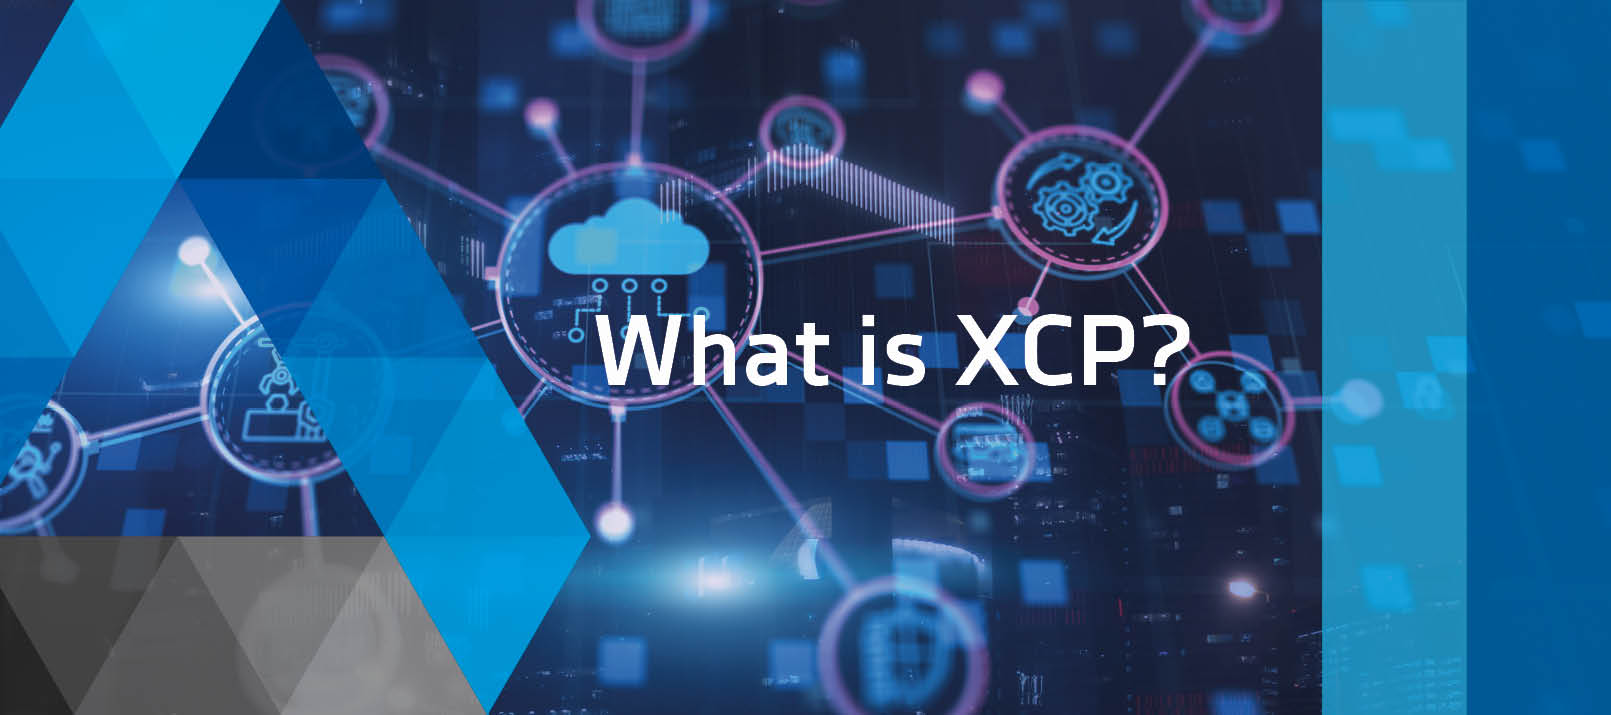 What is XCP?